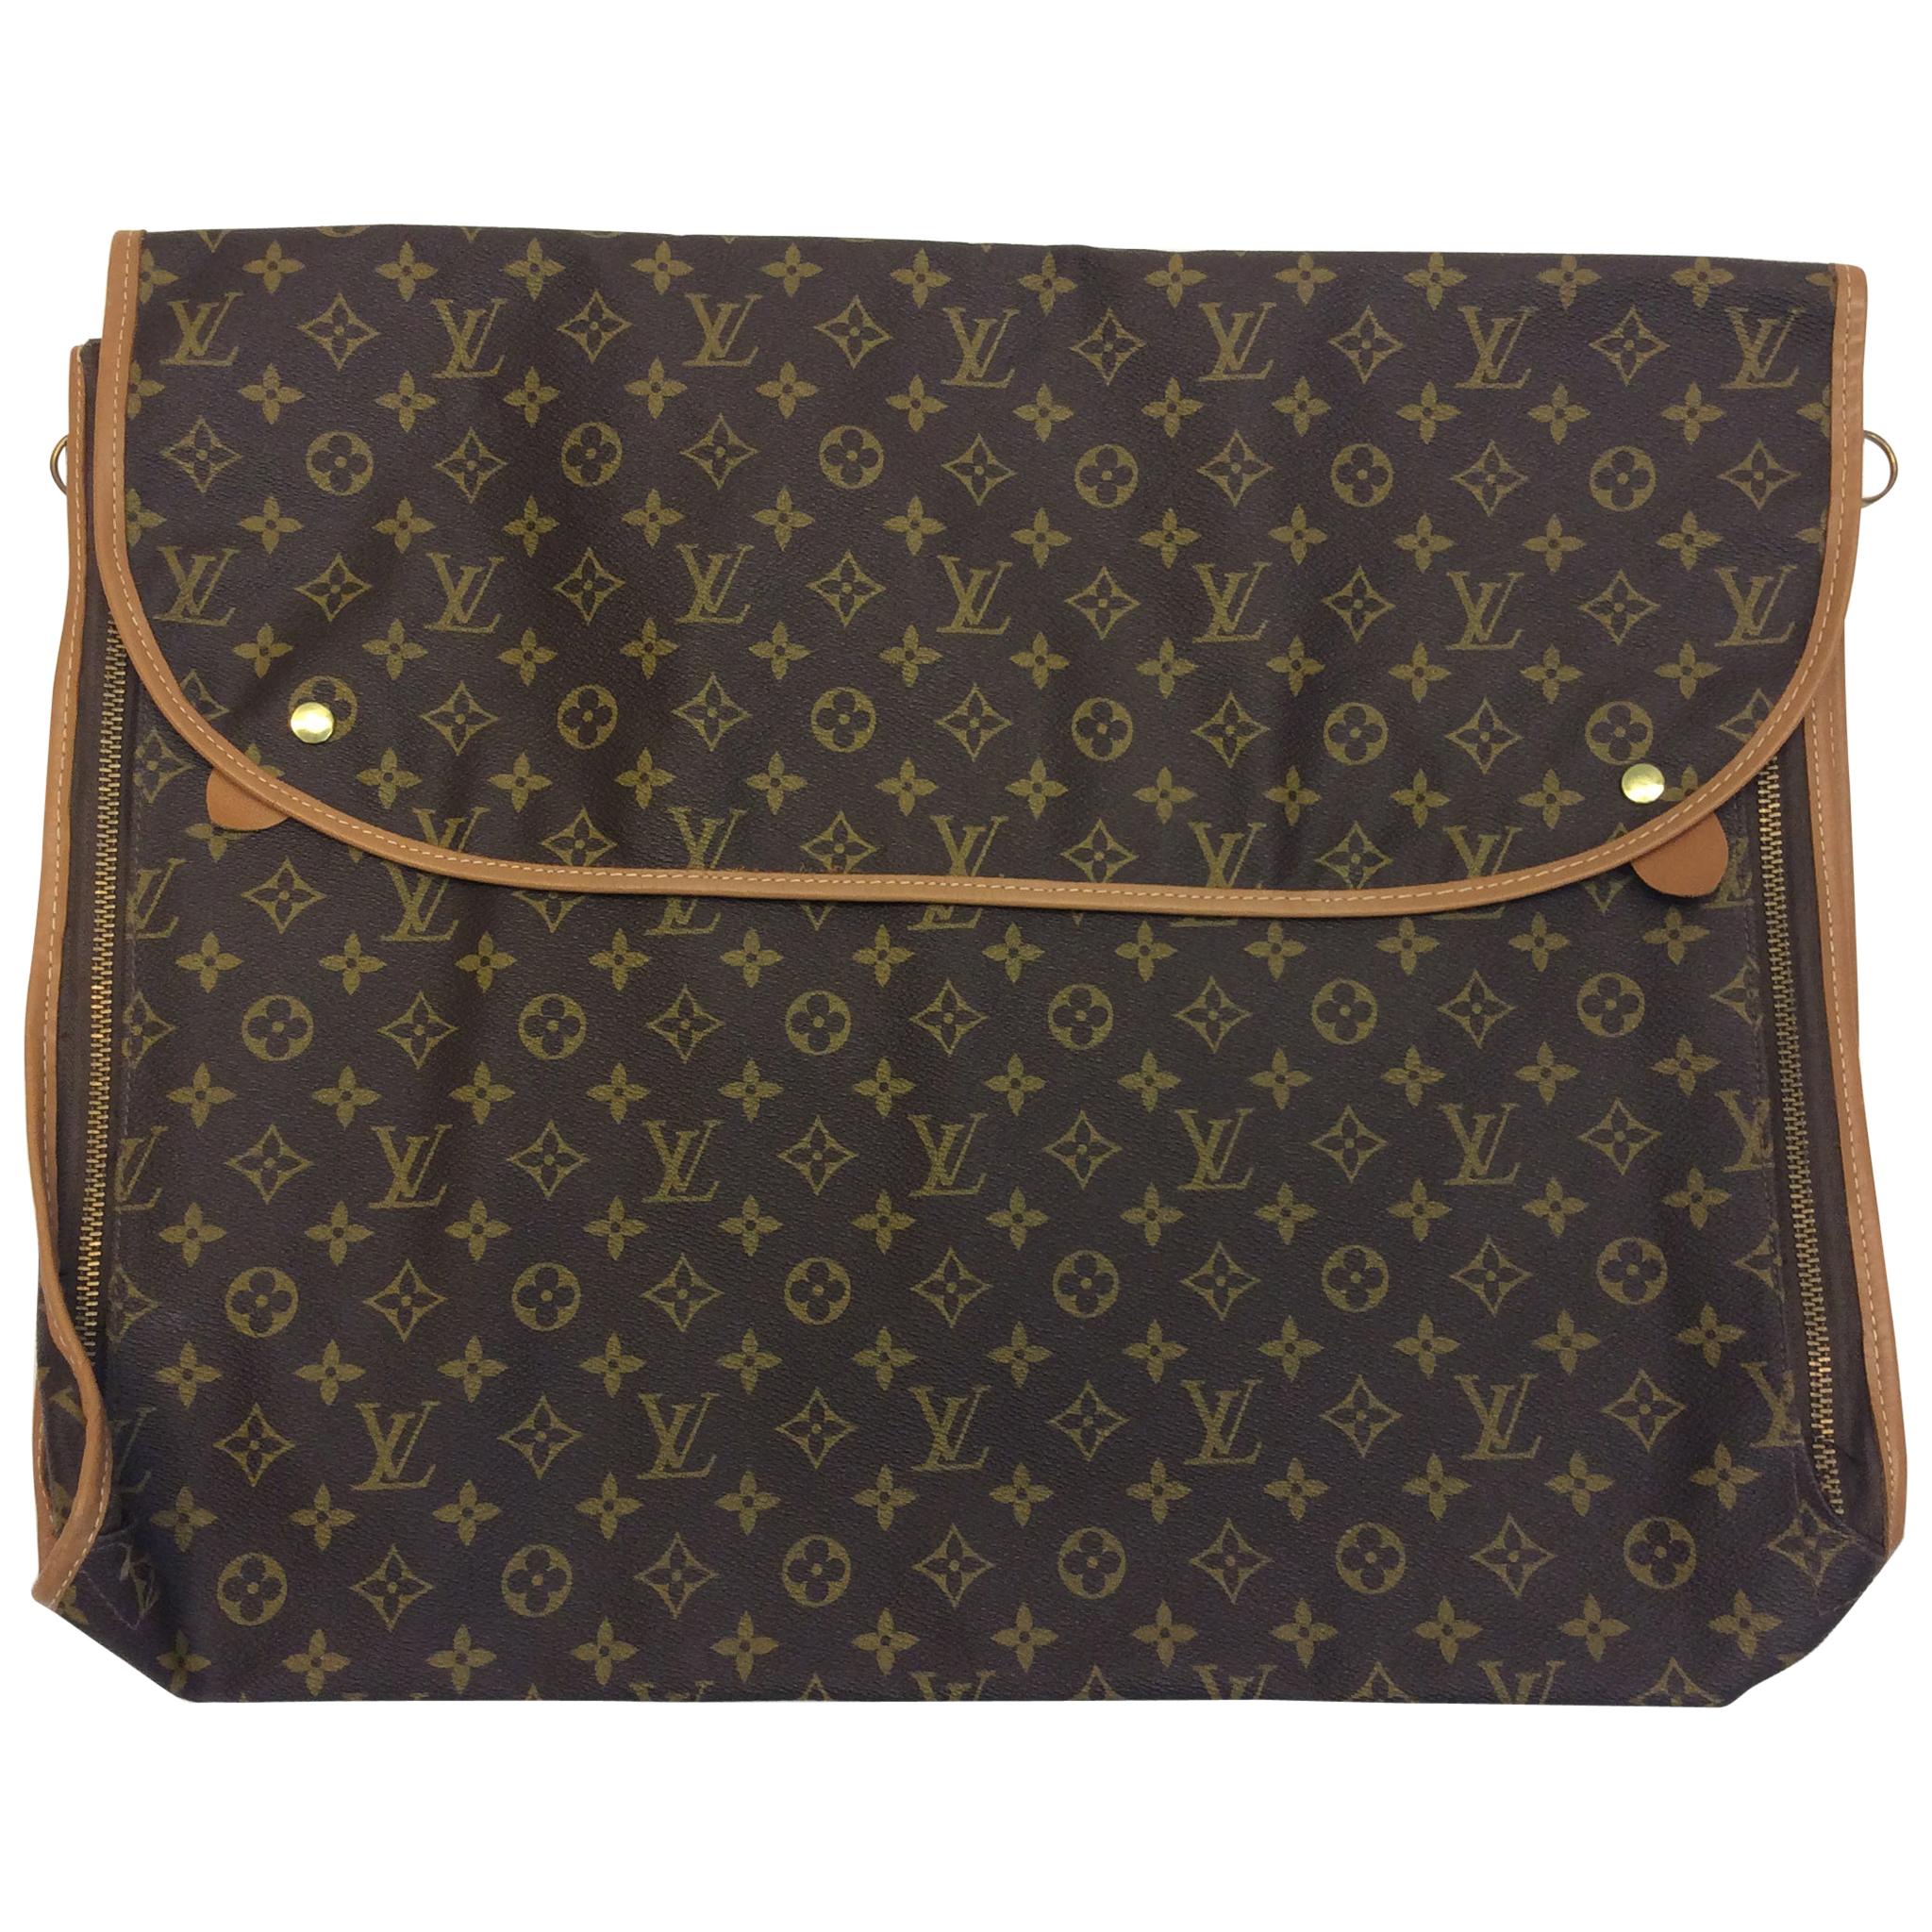 Louis Vuitton Large Luggage Insert For Sale